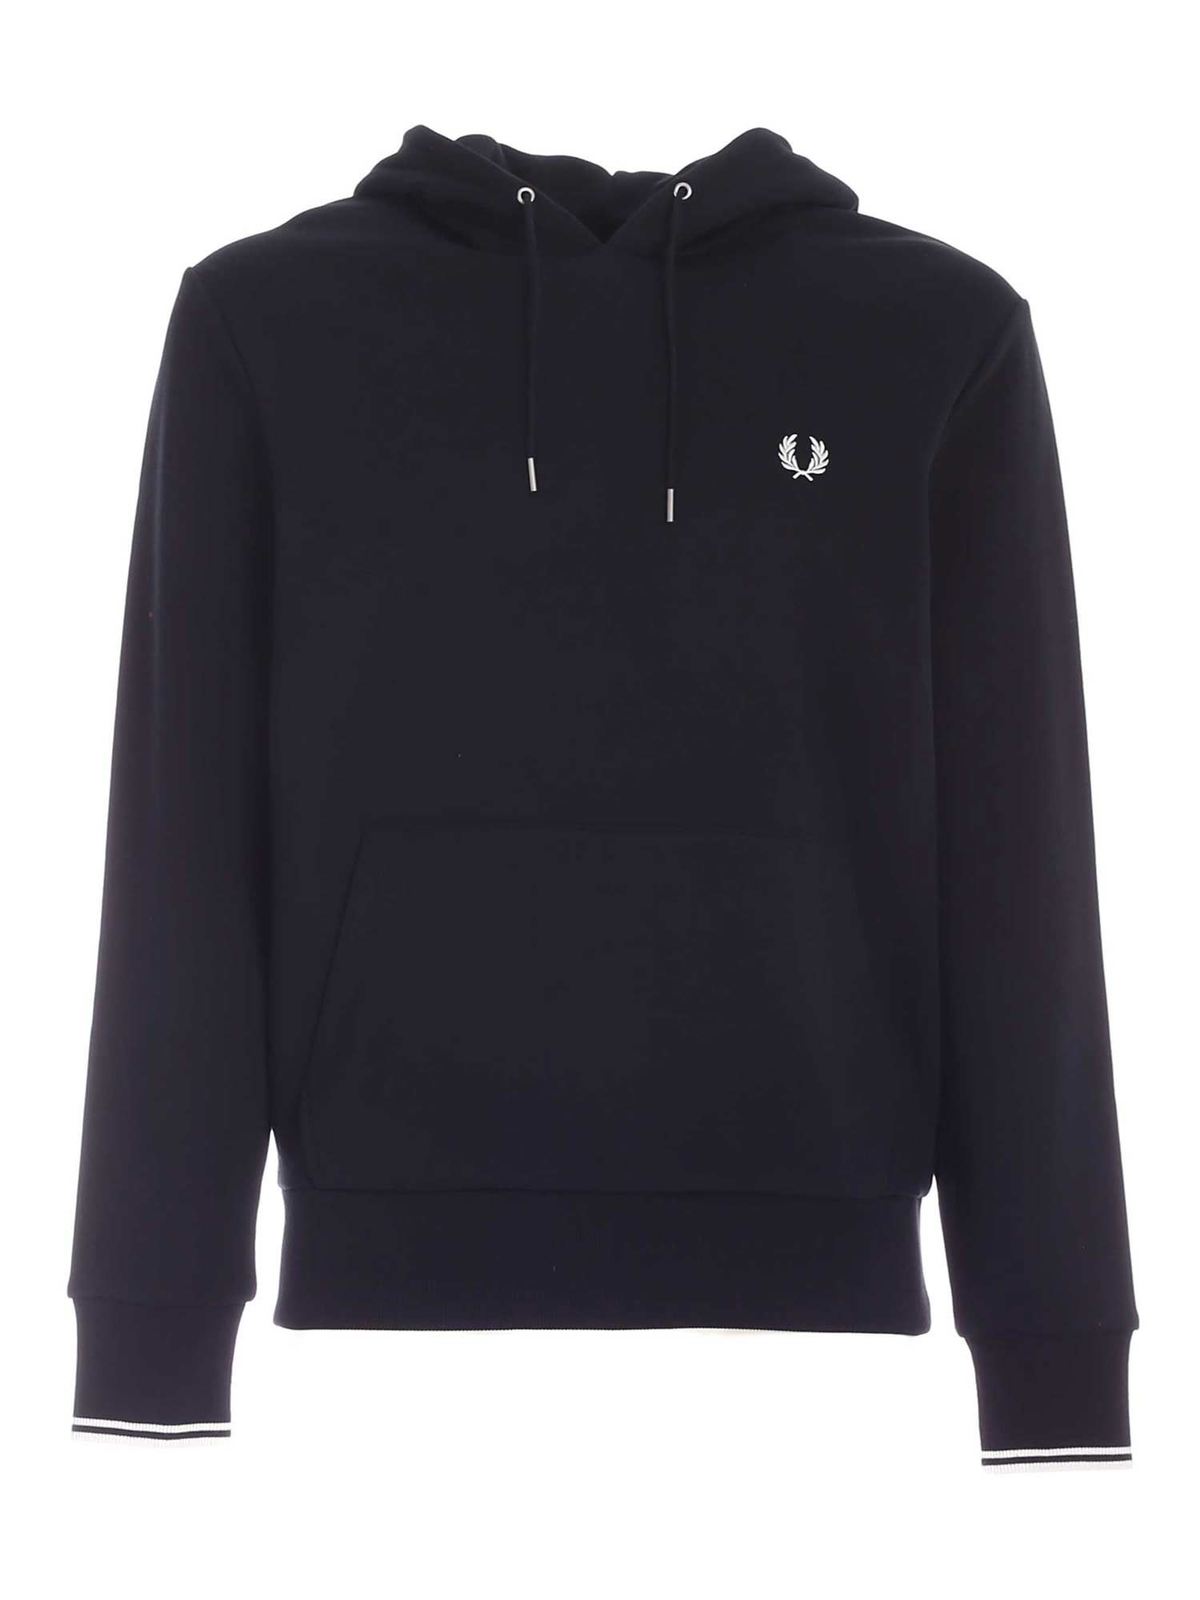 FRED PERRY TIPPED HOODIE IN BLACK